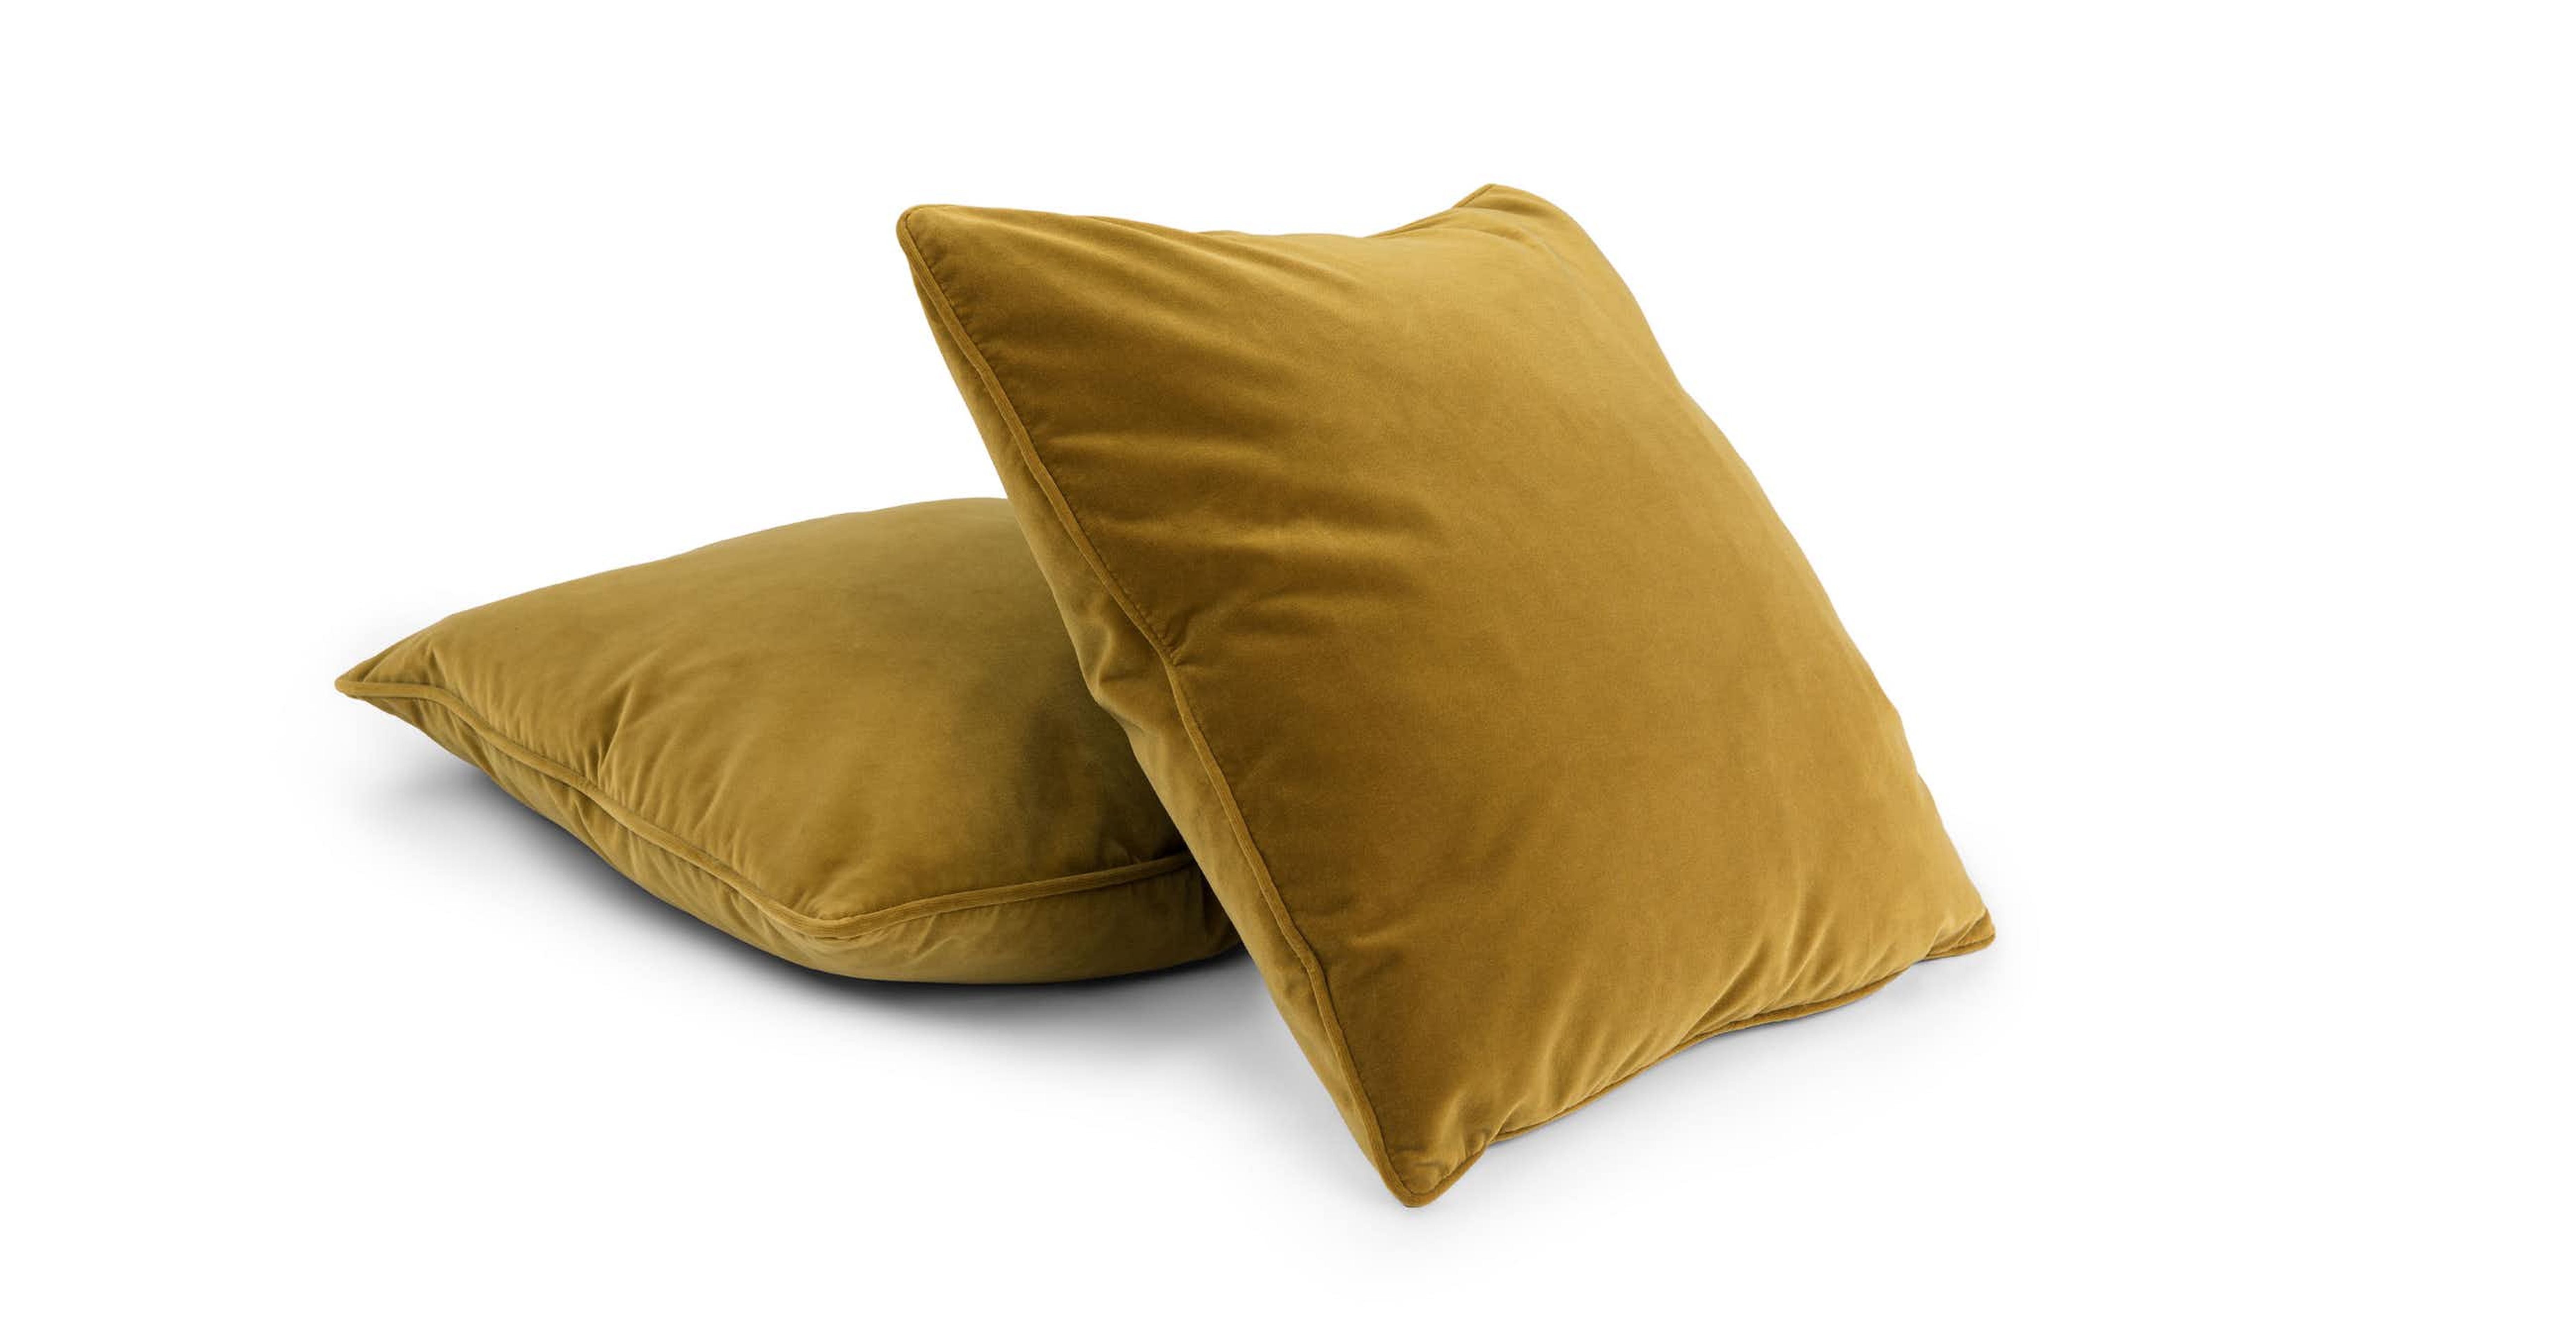 Lucca Yarrow Gold - Pillow Set of 2 - insert included - Article